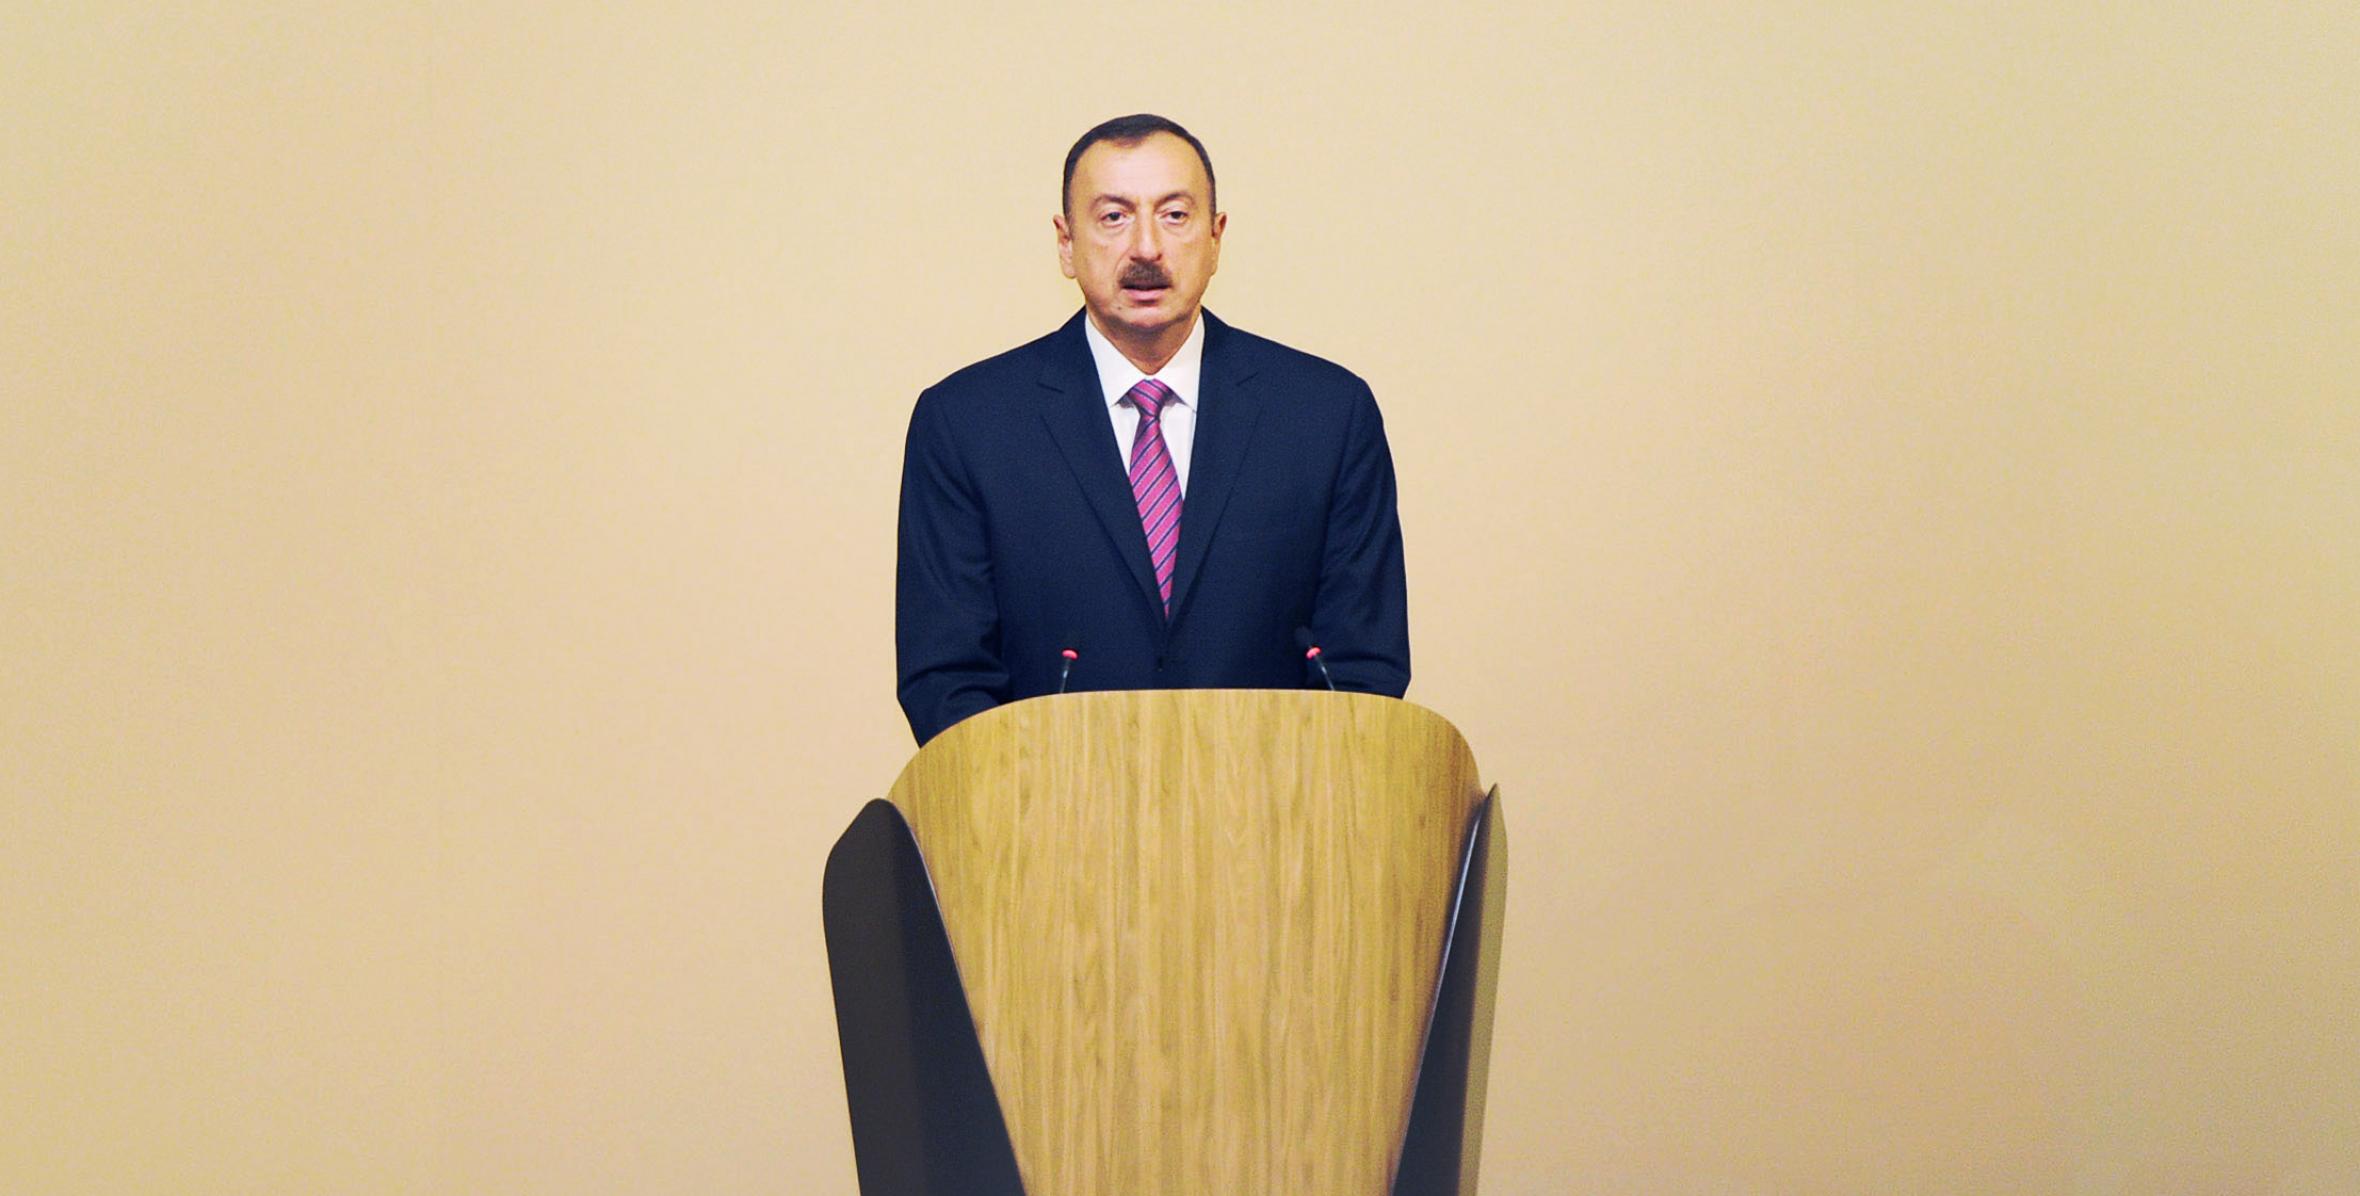 Speech by Ilham Aliyev at the opening ceremony of the Second World Forum on Intercultural Dialogue